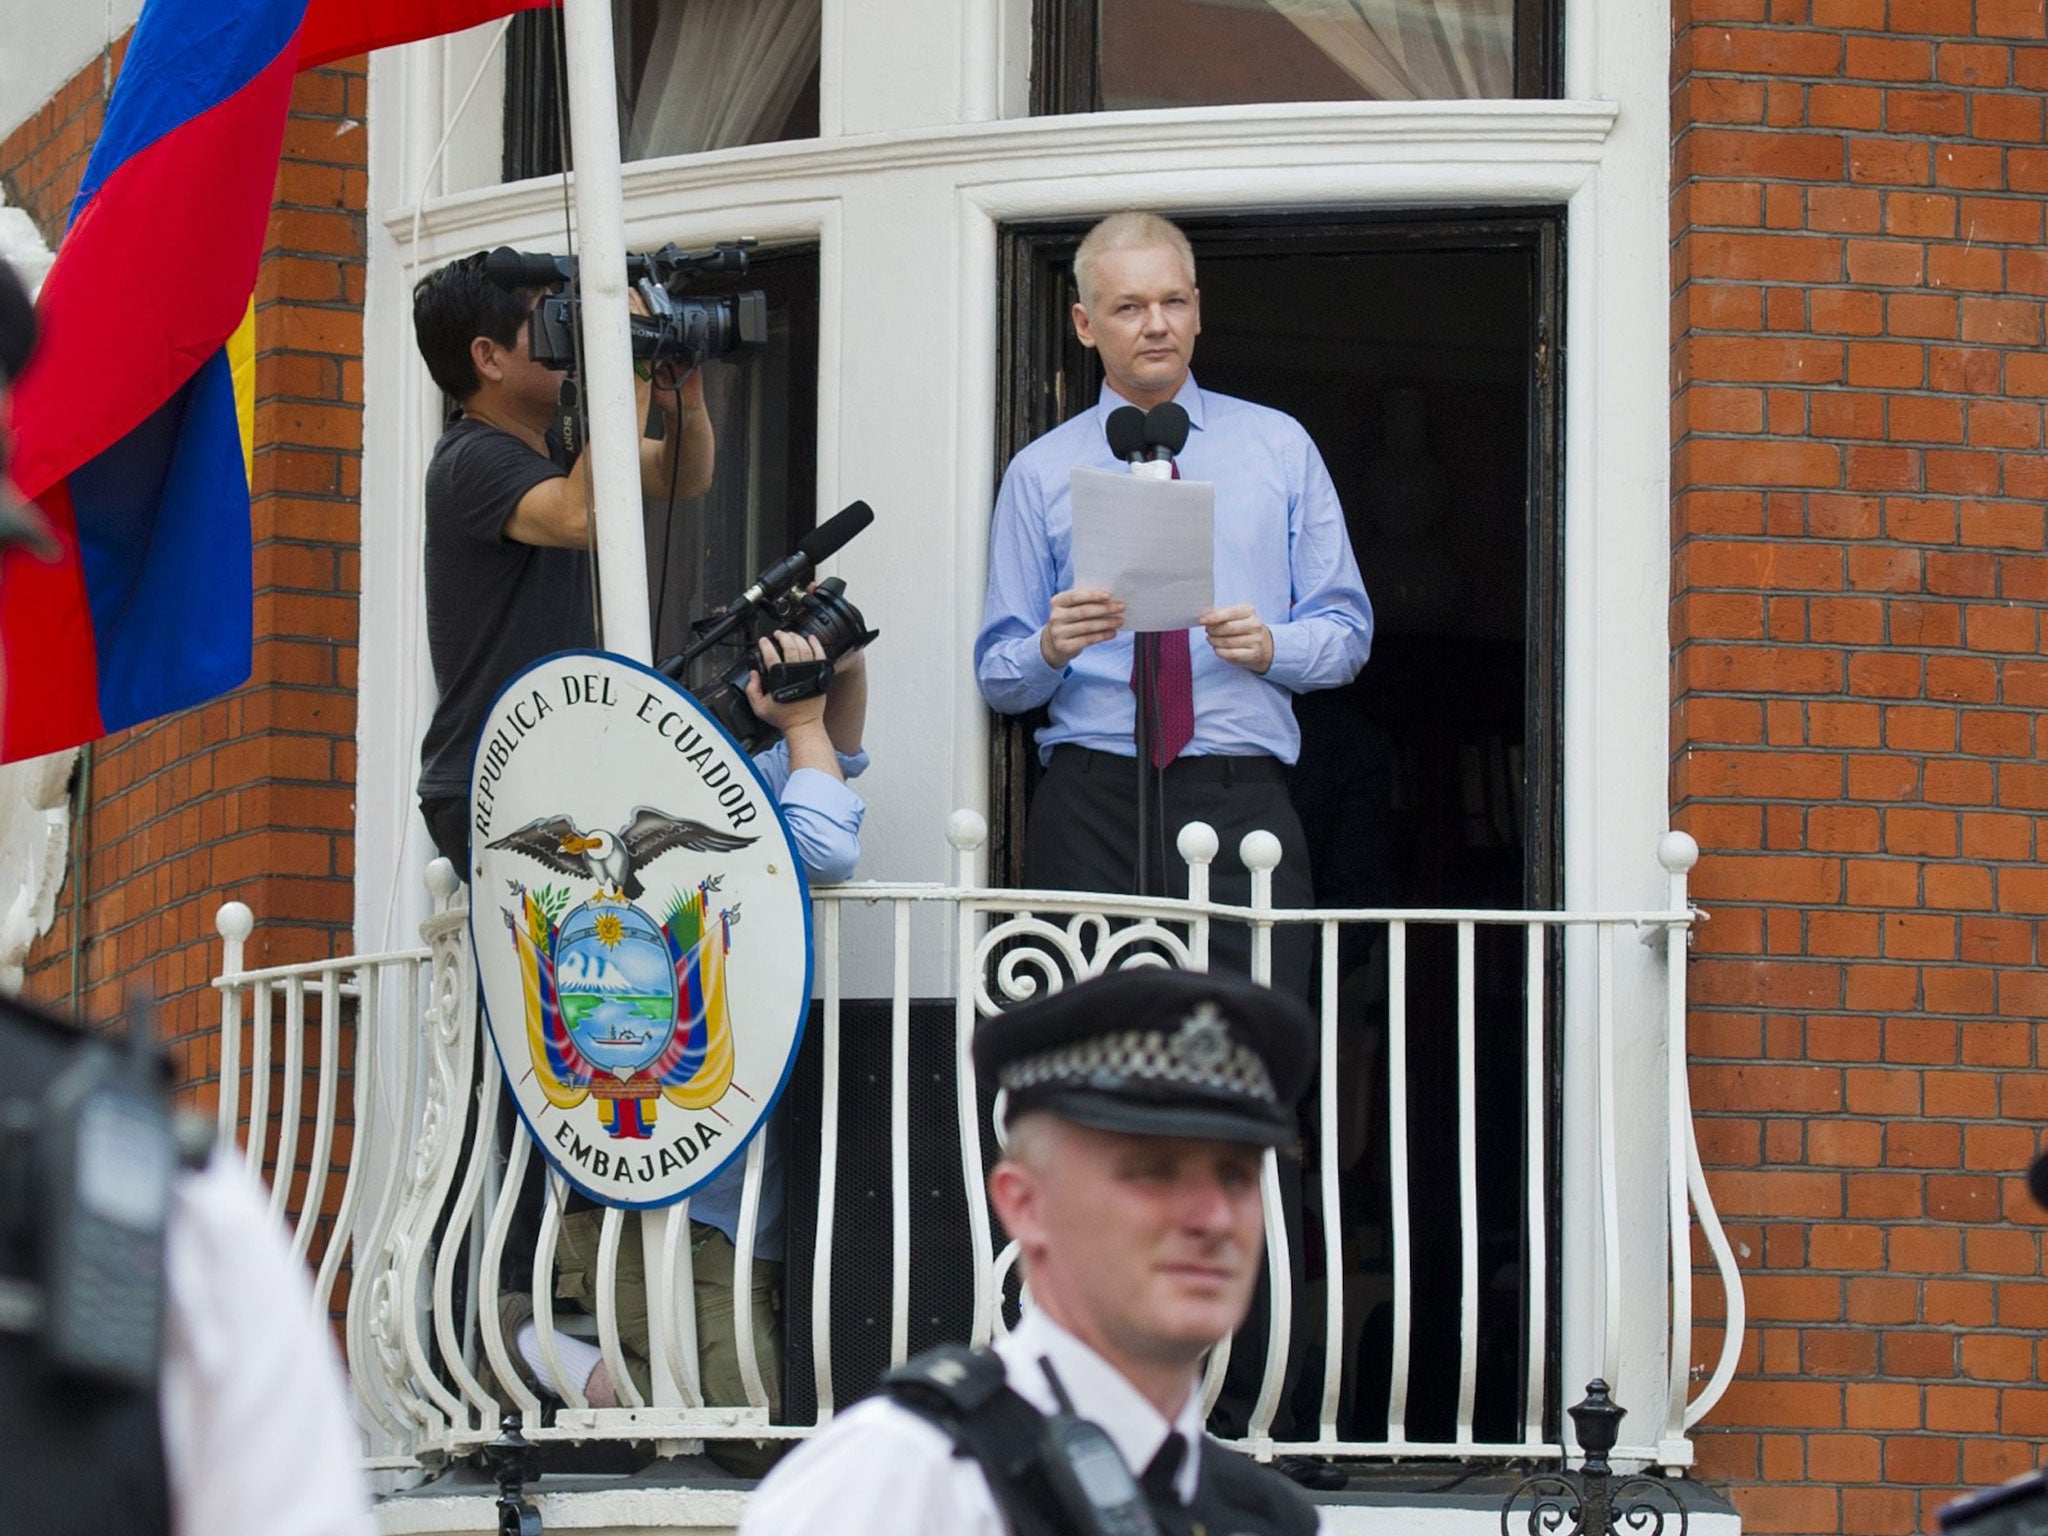 Julian Assange delivering a statement on the balcony at the Ecuador Embassy in 2012 (EPA)